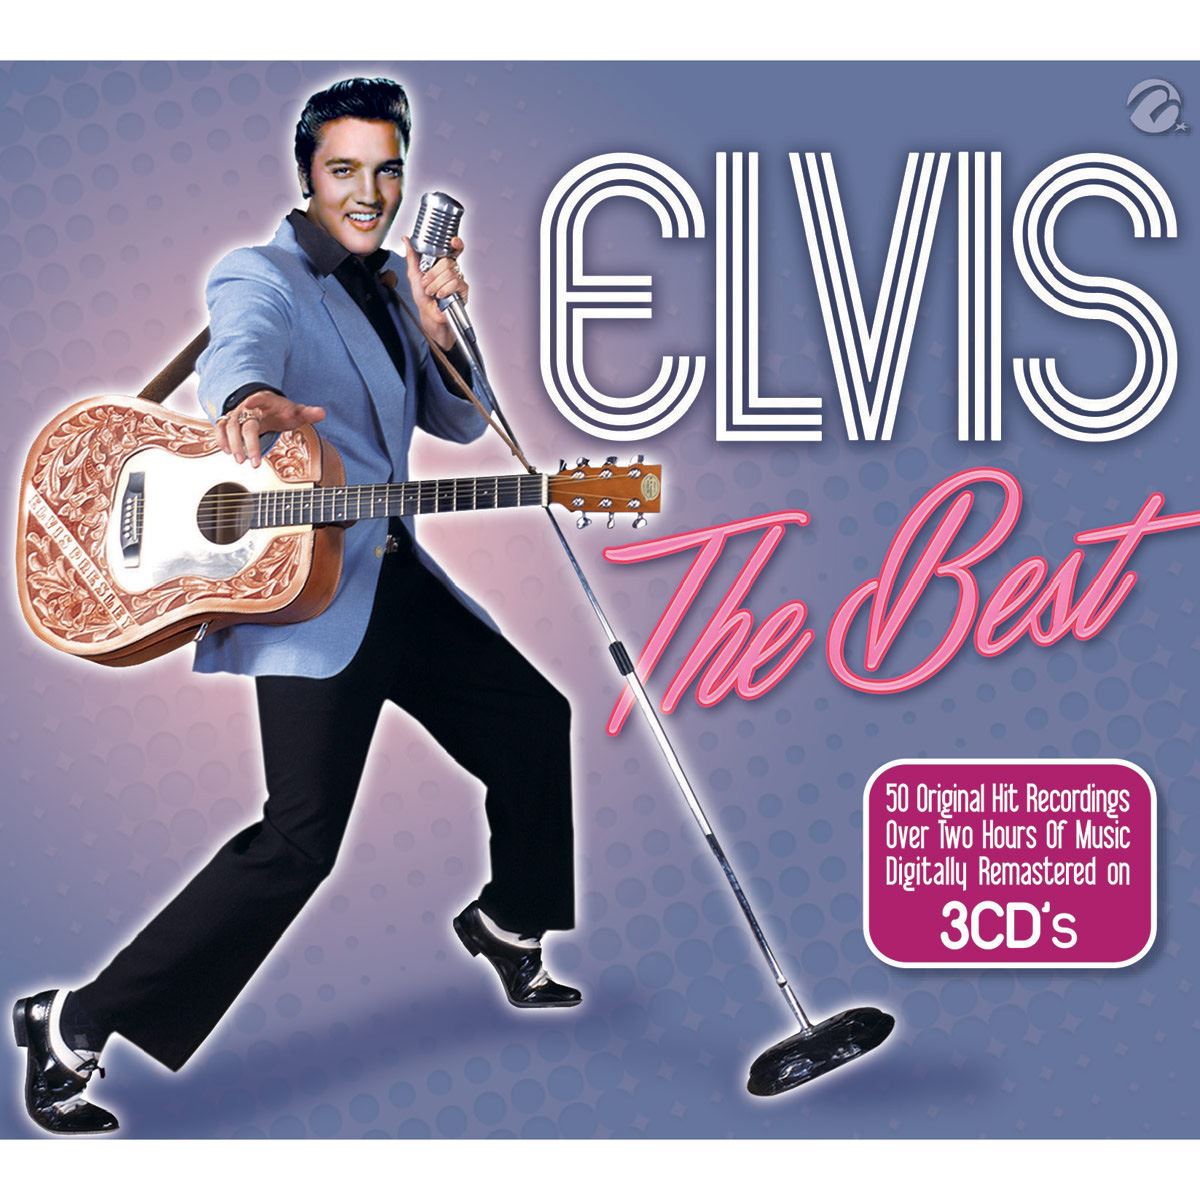 CD3 The Best of Elevis Presley